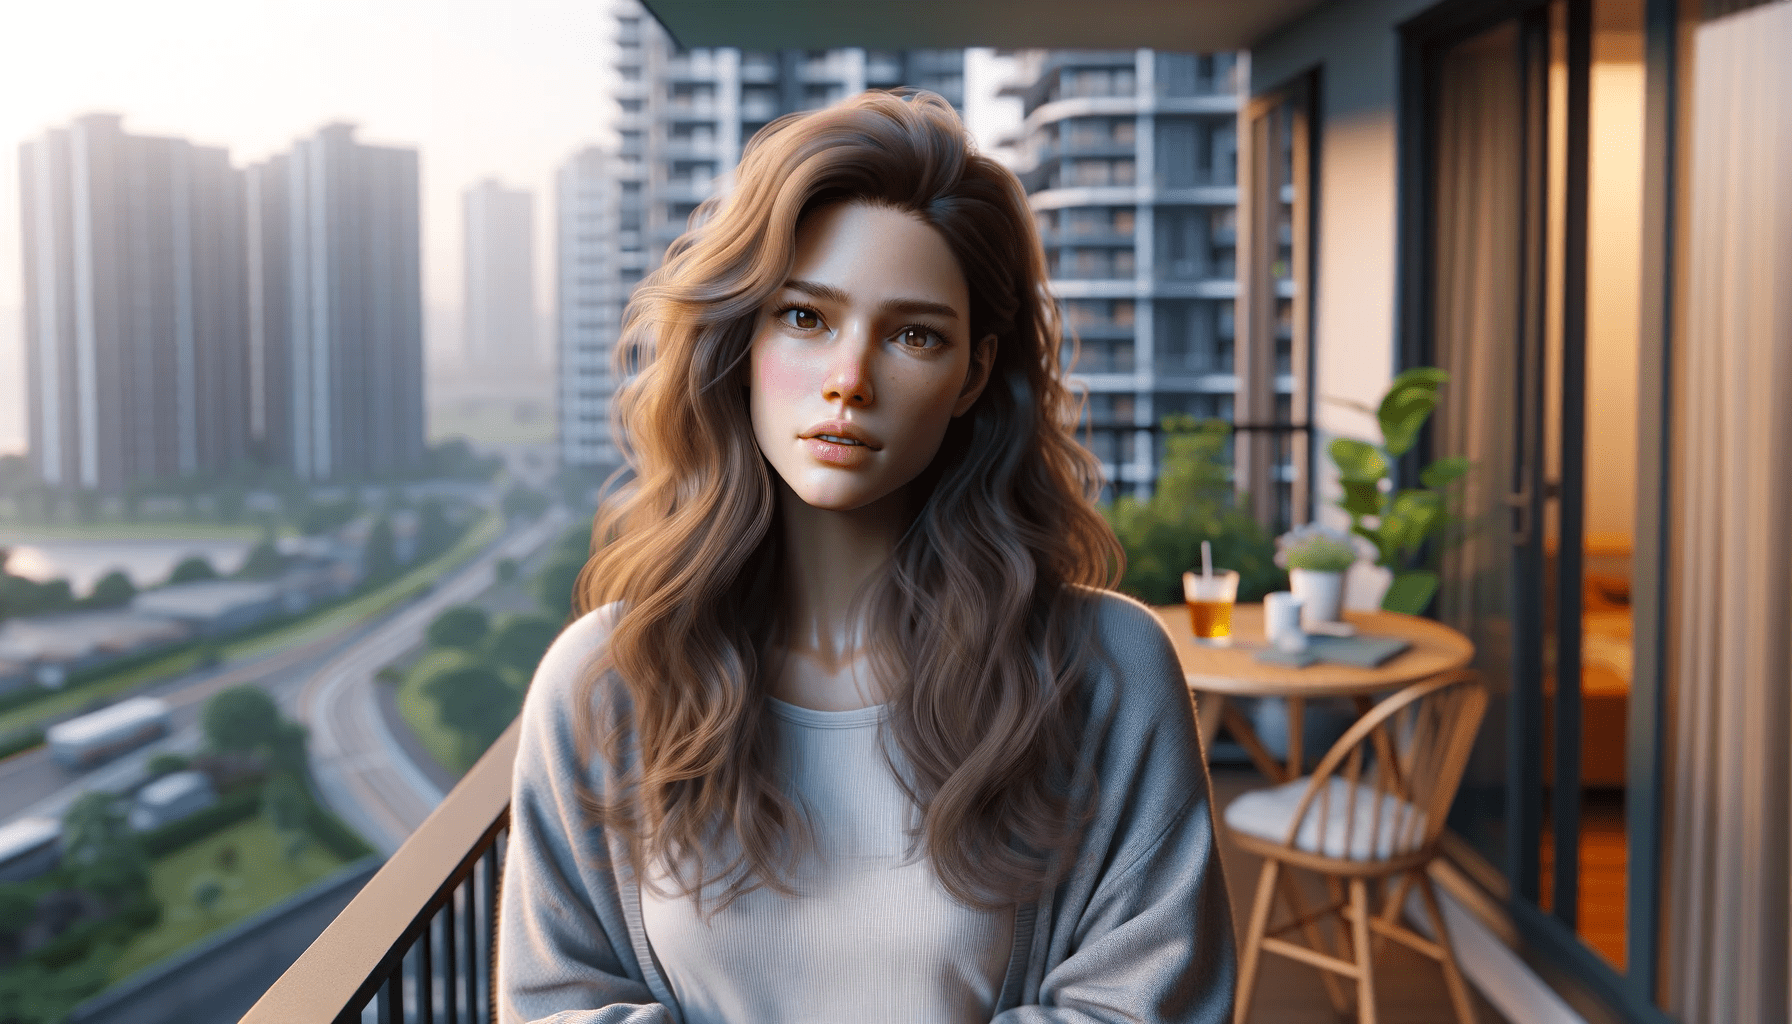 a beautiful woman in her late 20s to early 30s standing in her apartment balcony. She has long flowing hair and shes weari